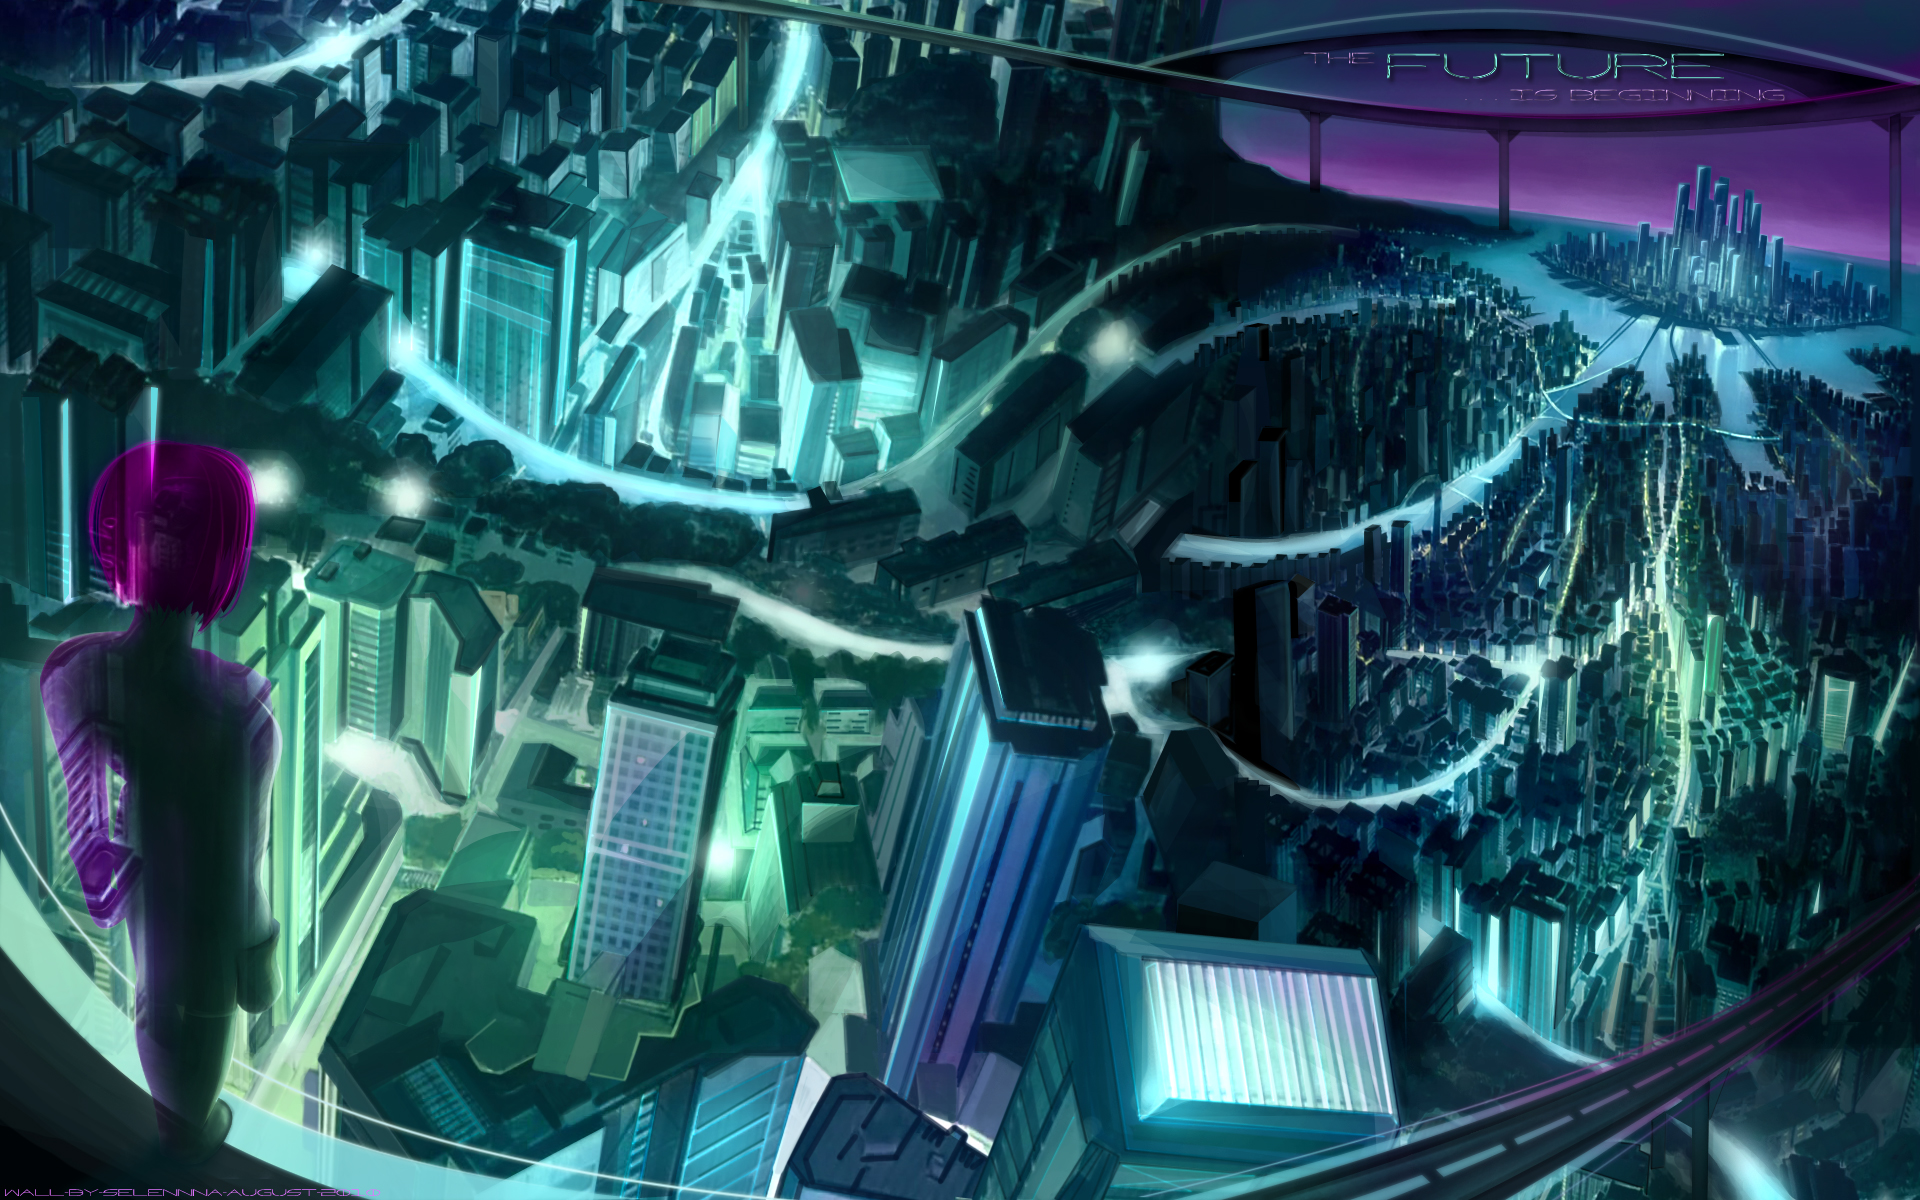 Ghost In The Shell Anime Wallpapers